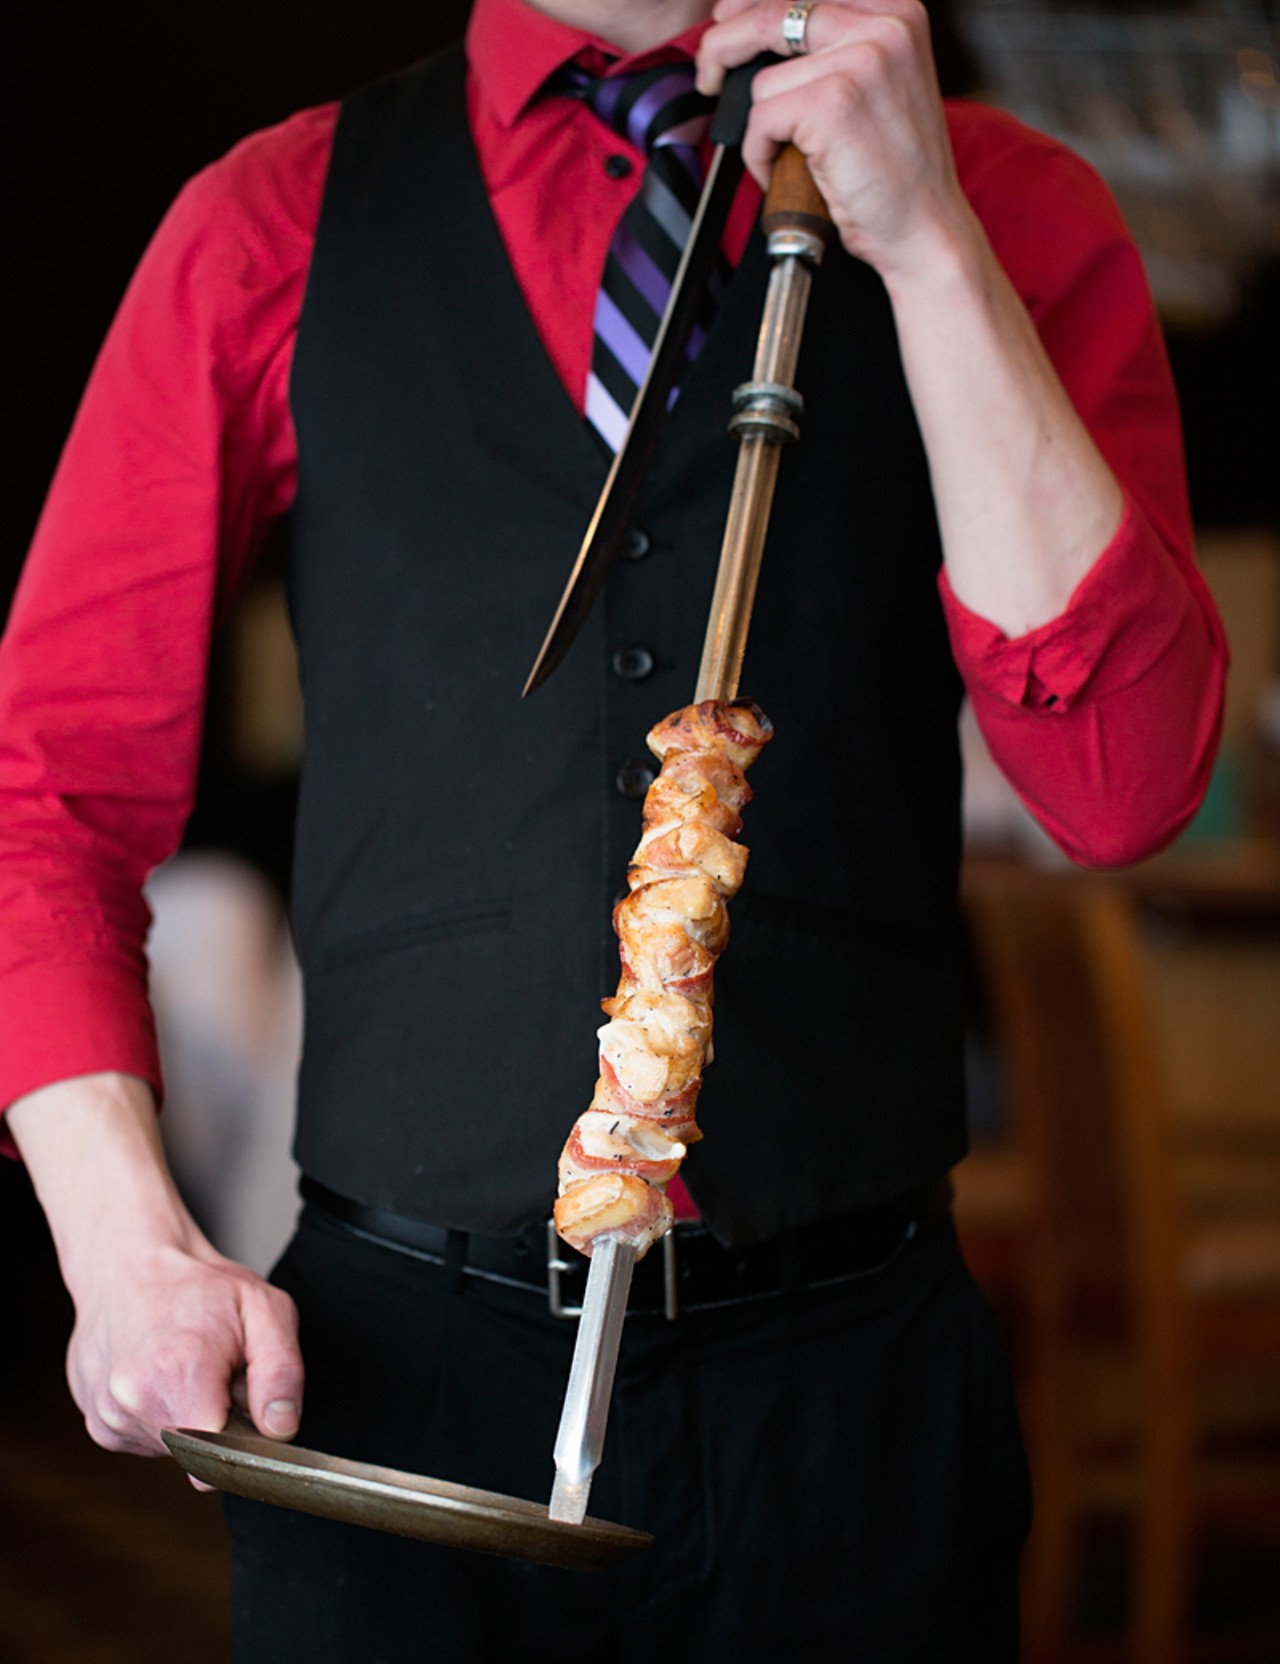 Skewer of Chicken Wrapped in Bacon.